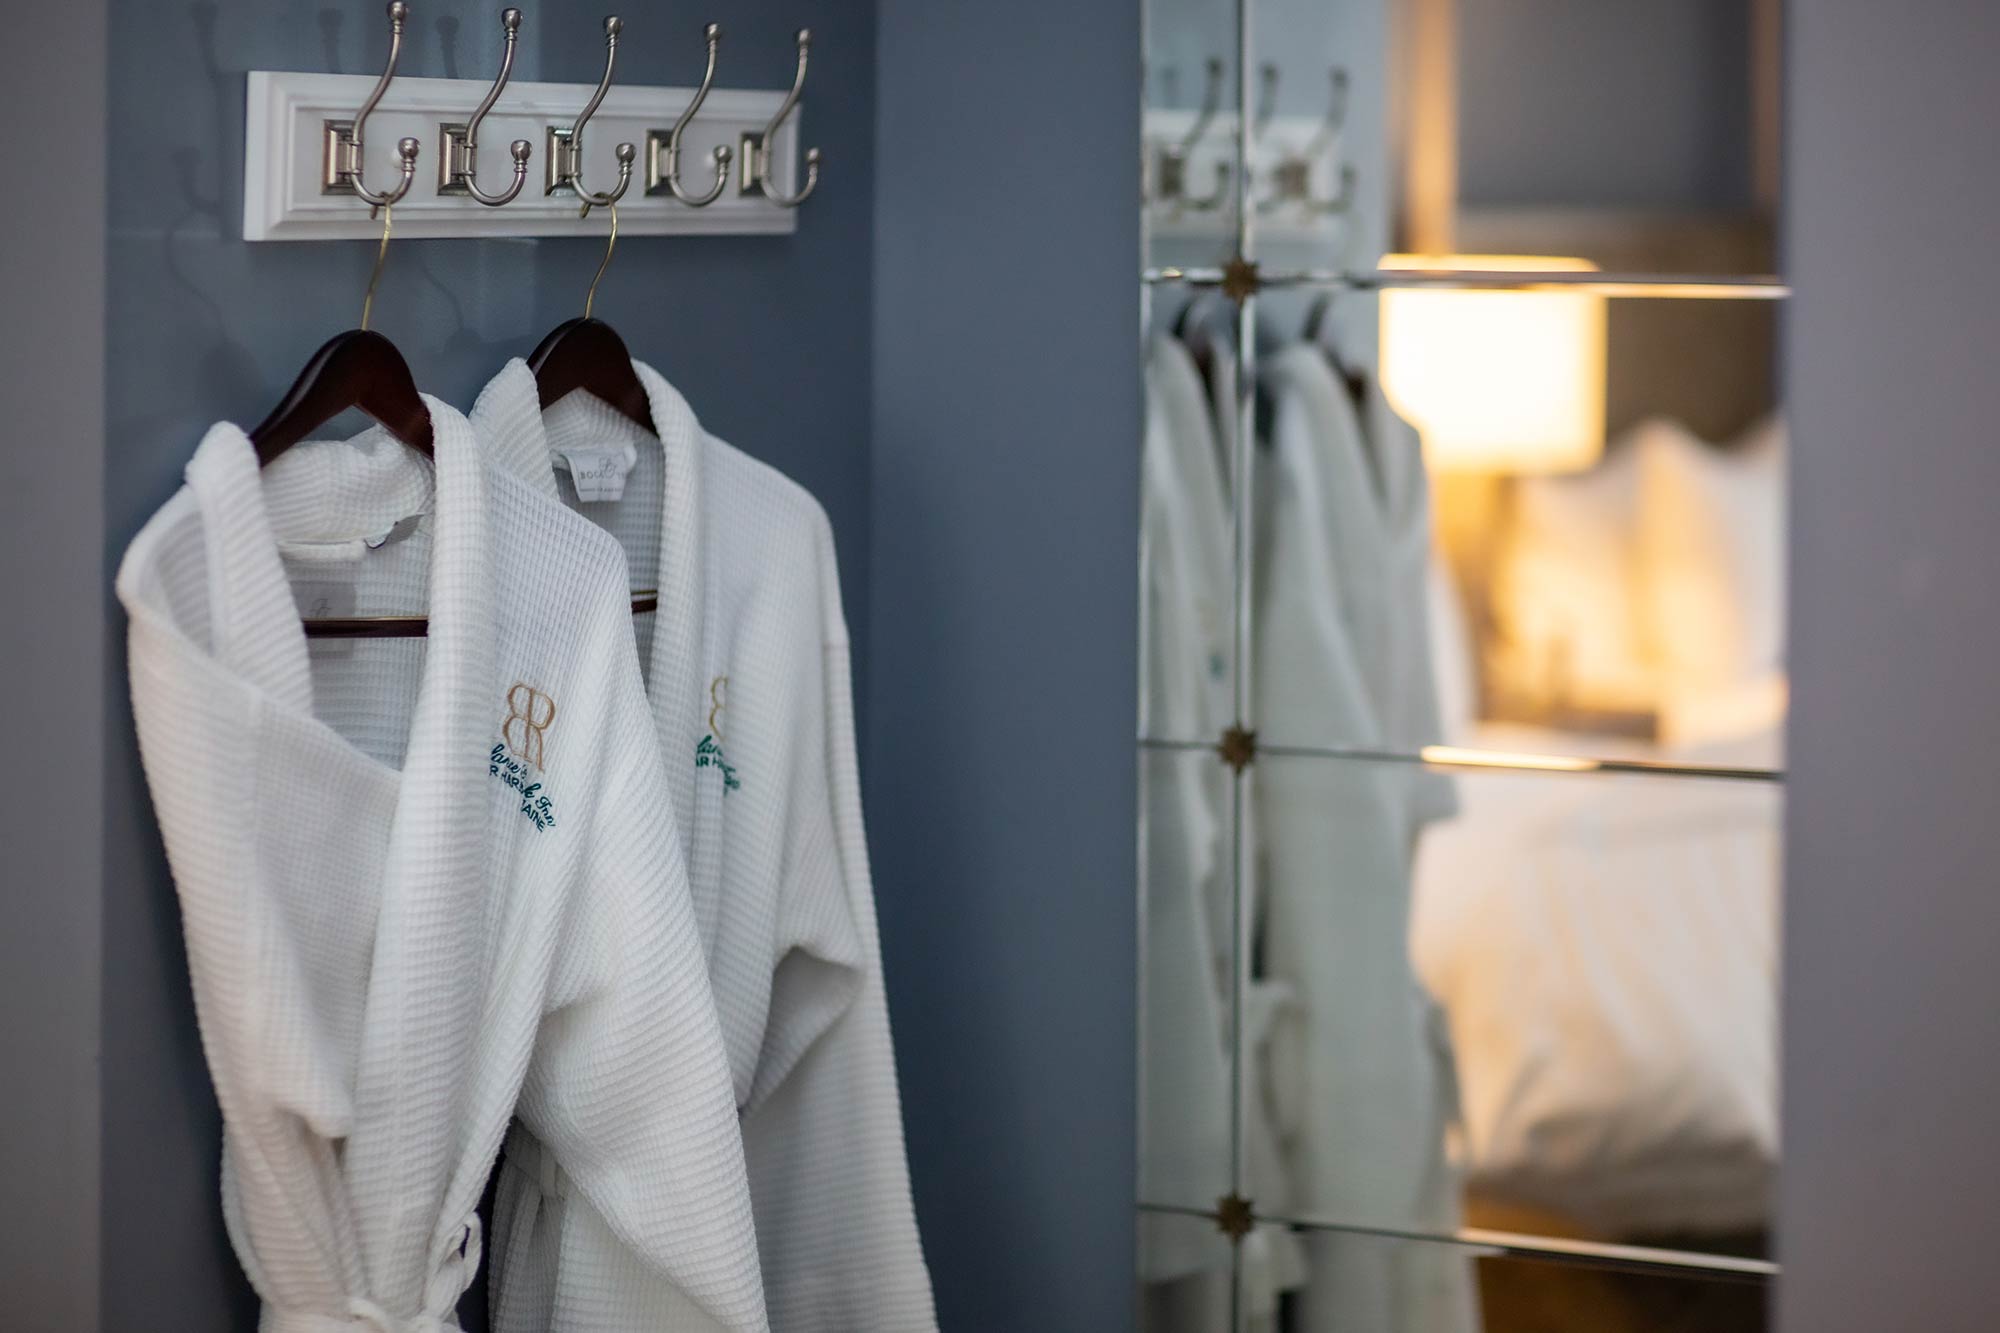 Bathrobes hanging in a hotel room.